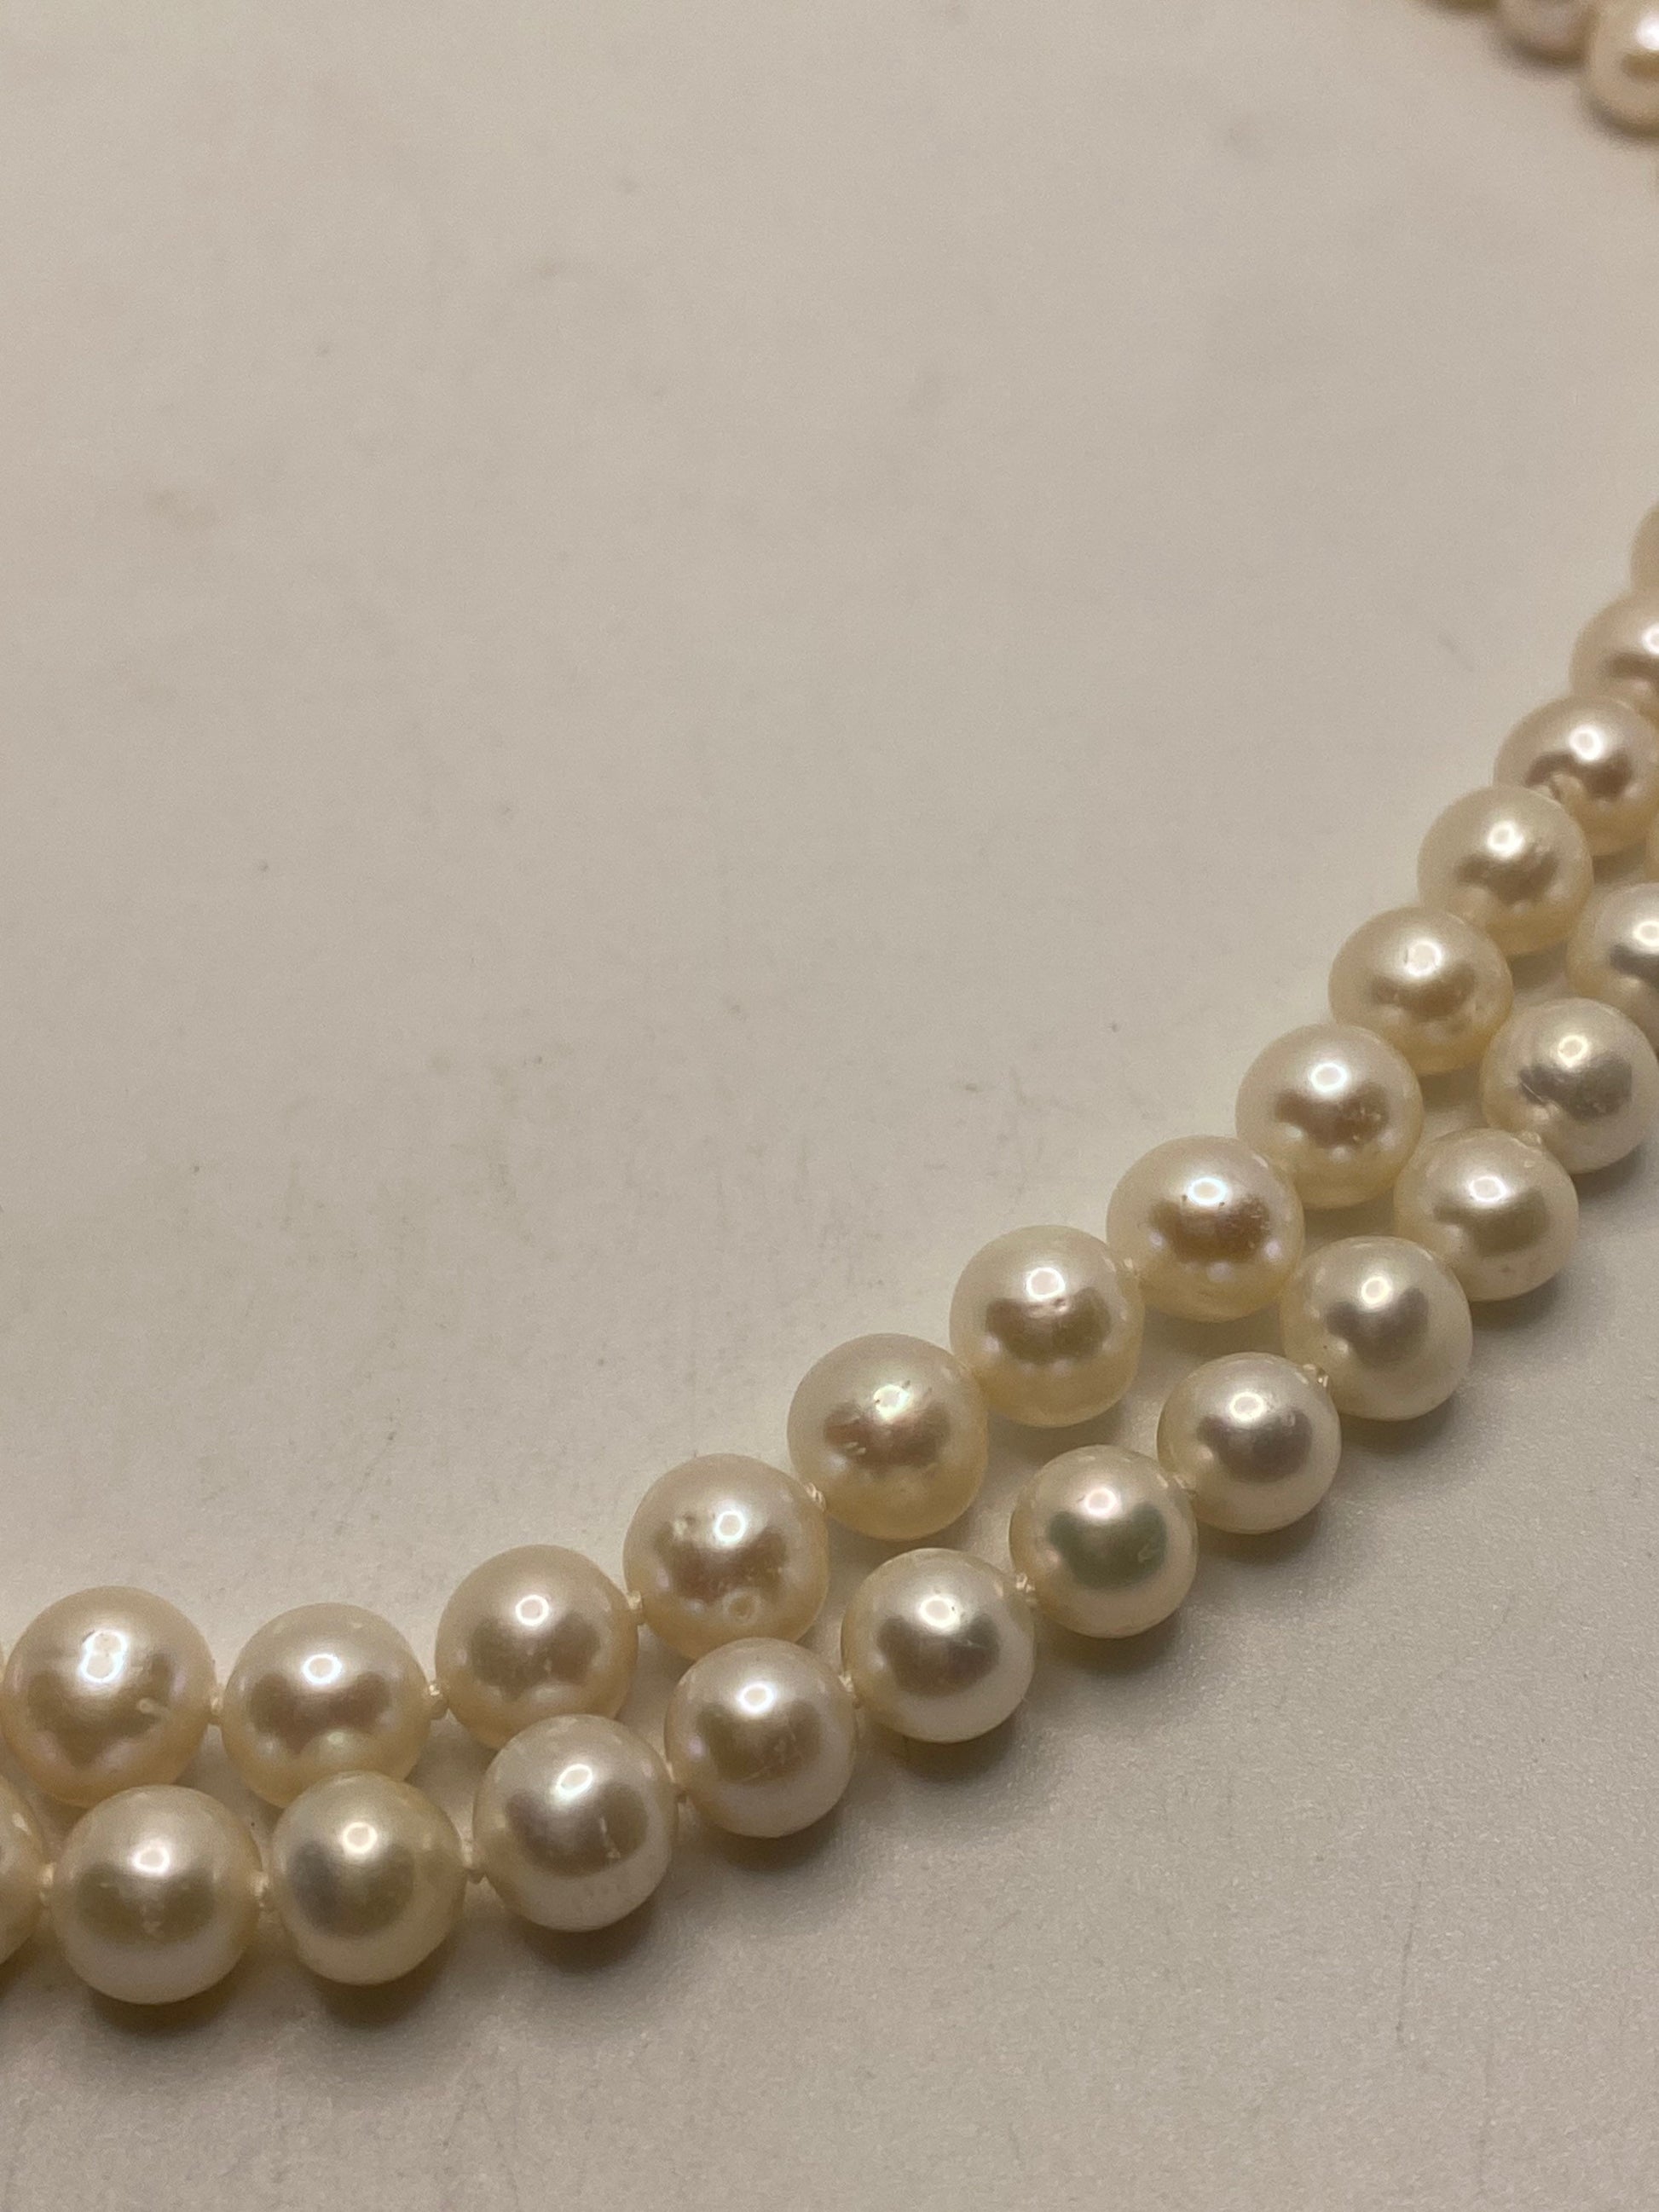 Vintage Hand Knotted Cream Pearl Double 17 in Necklace